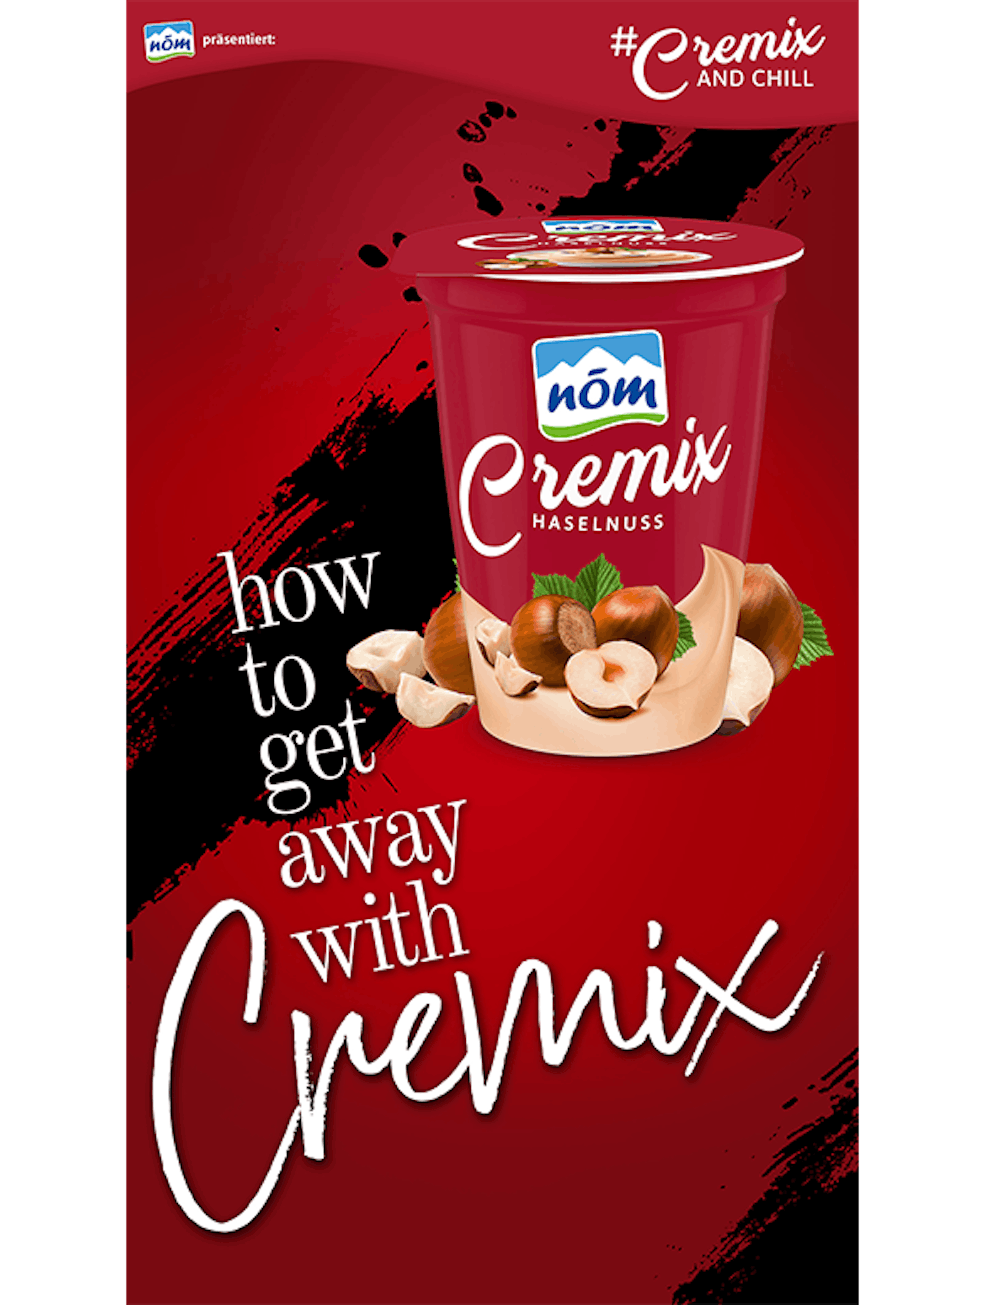 How to get away with Cremix